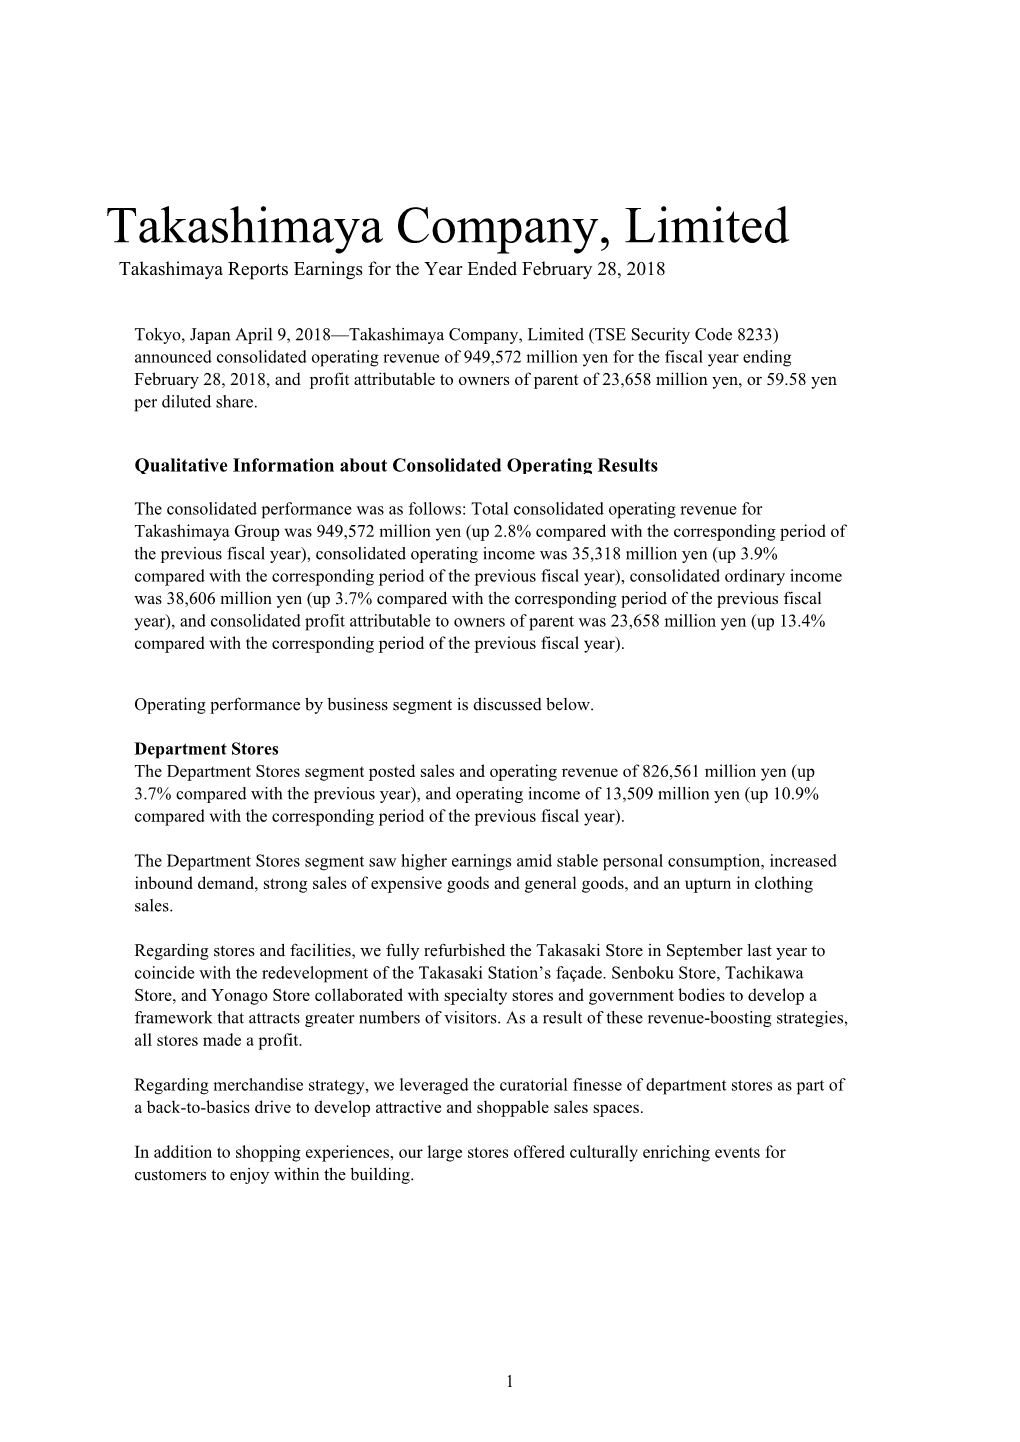 Takashimaya Reports Earnings for the Year Ended Feb. 28, 2018